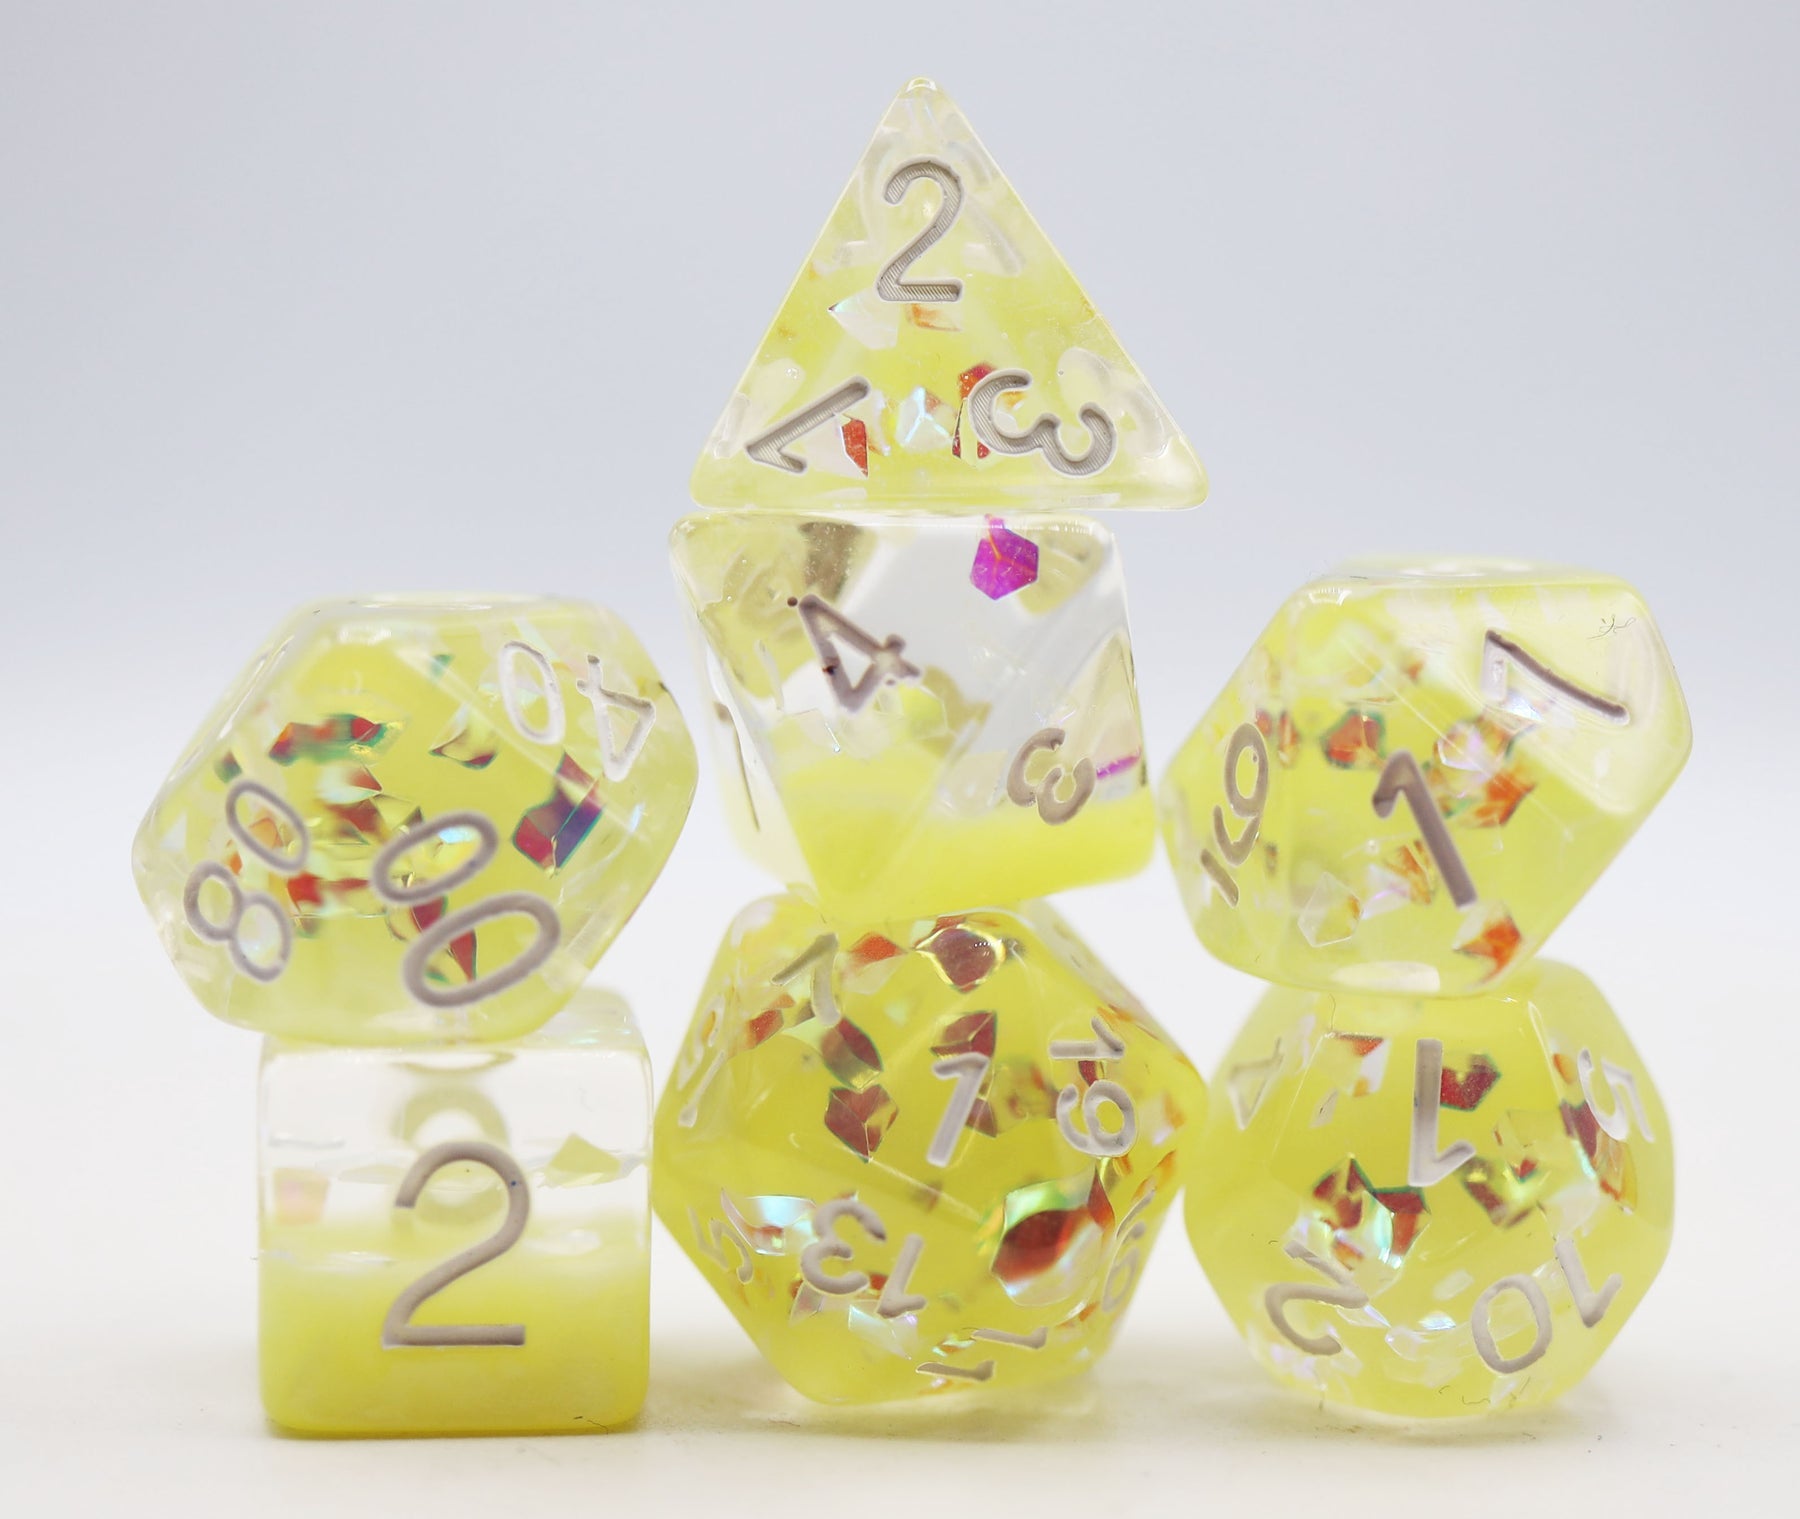 MILK YELLOW WITH SHIMMER DIAMOND FILLED RPG DICE | Grognard Games